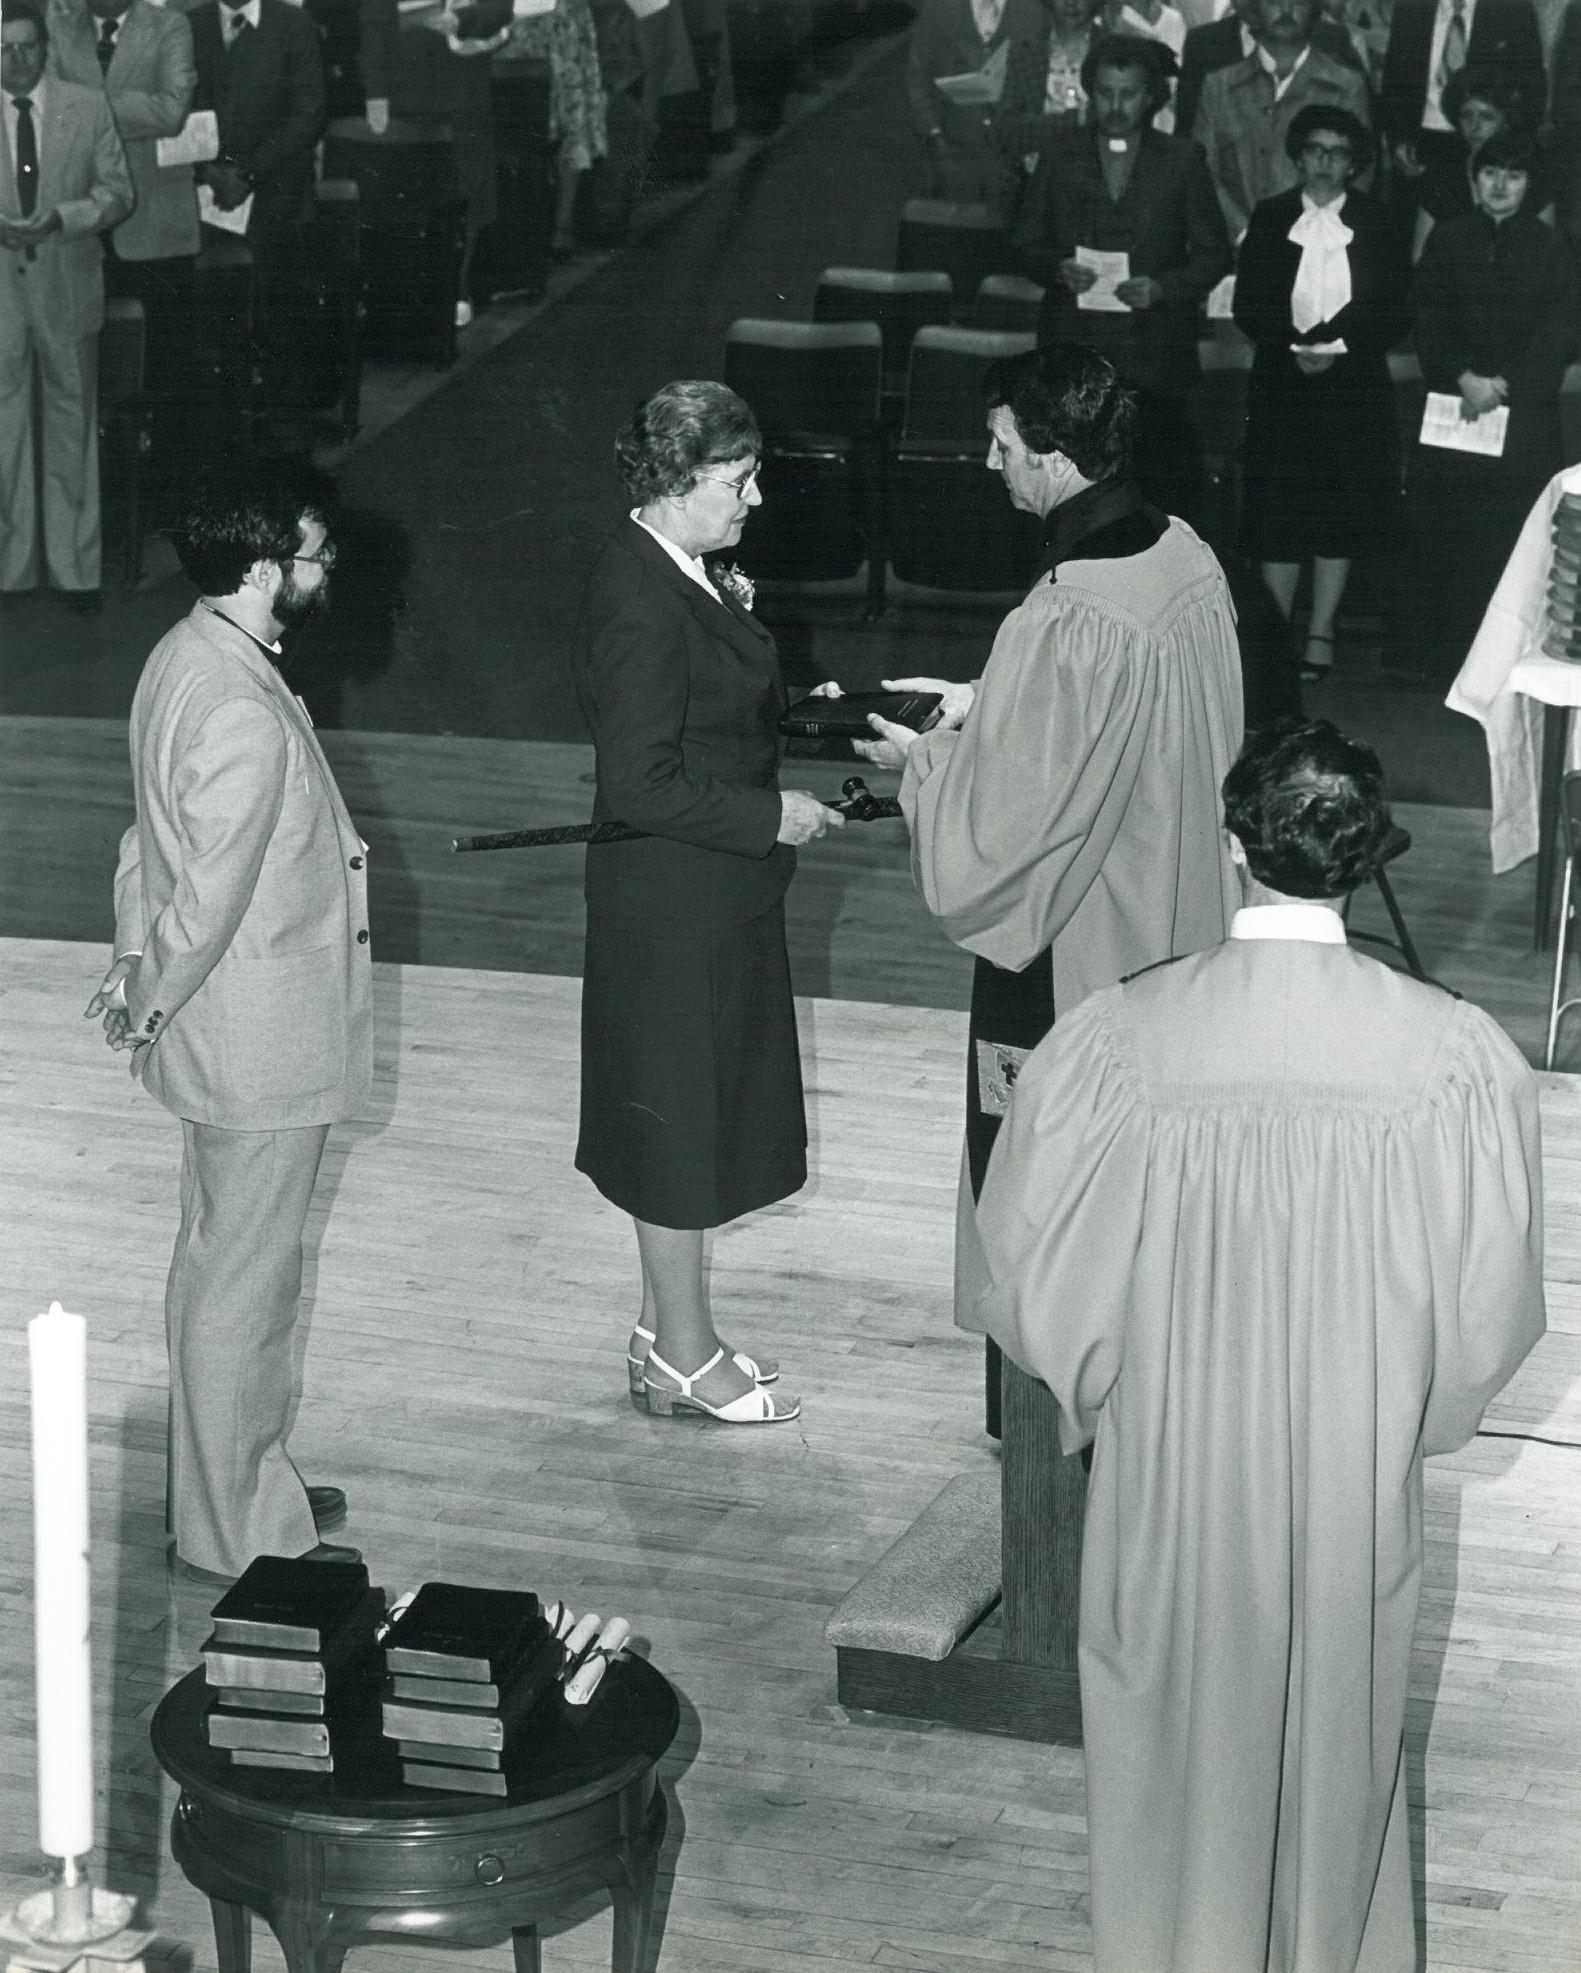 Polly Ervin: First Laywoman President